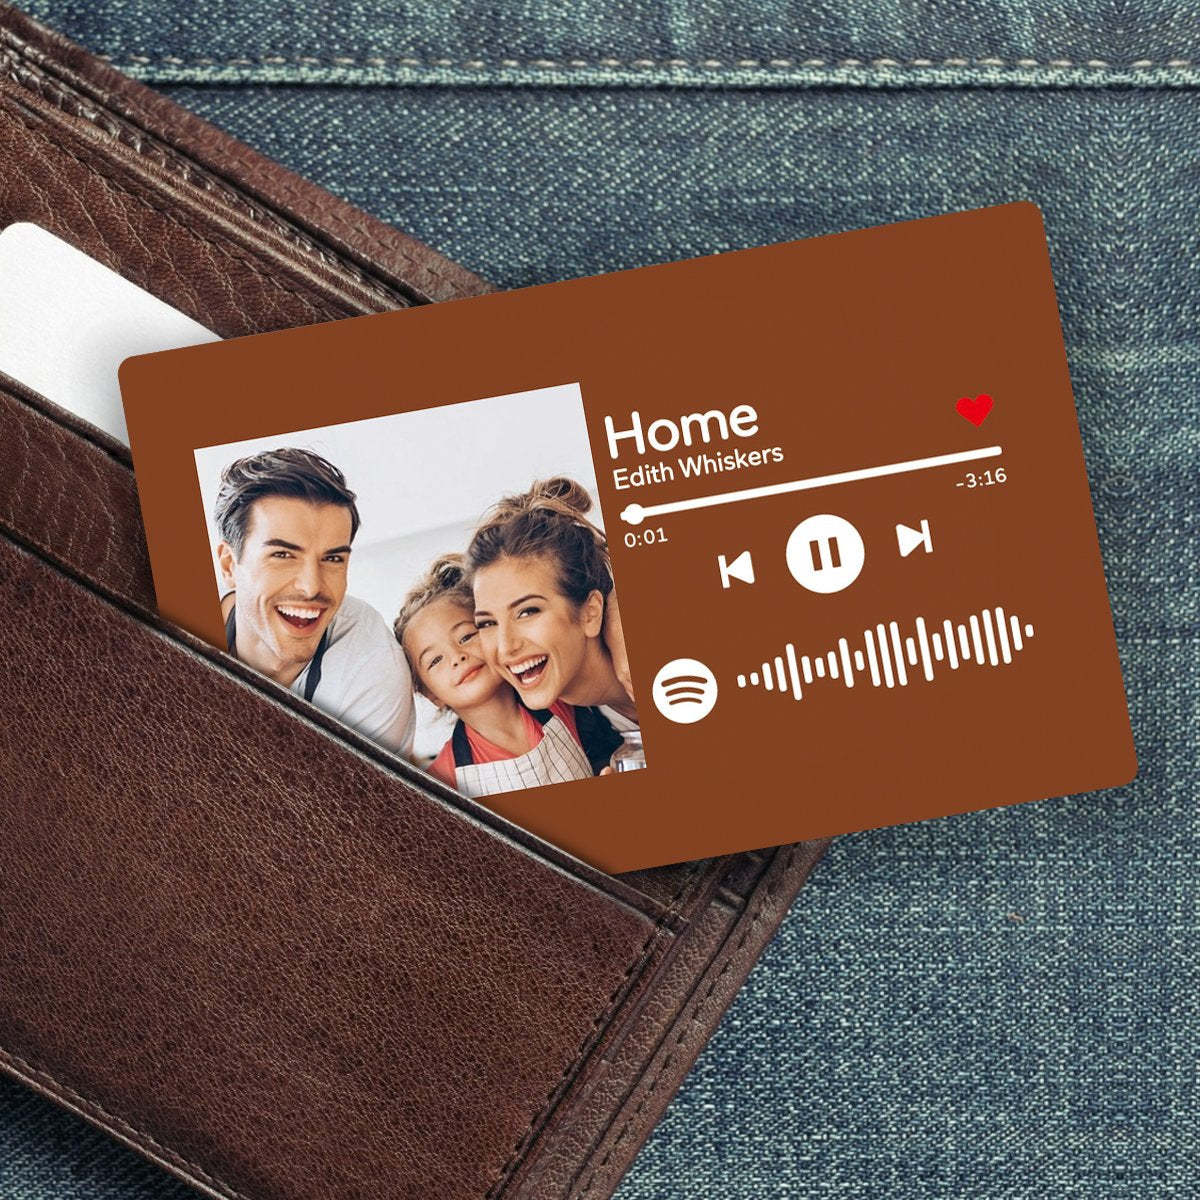 Scannable Spotify Code Photo Wallet Insert Card Gifts for Family - 